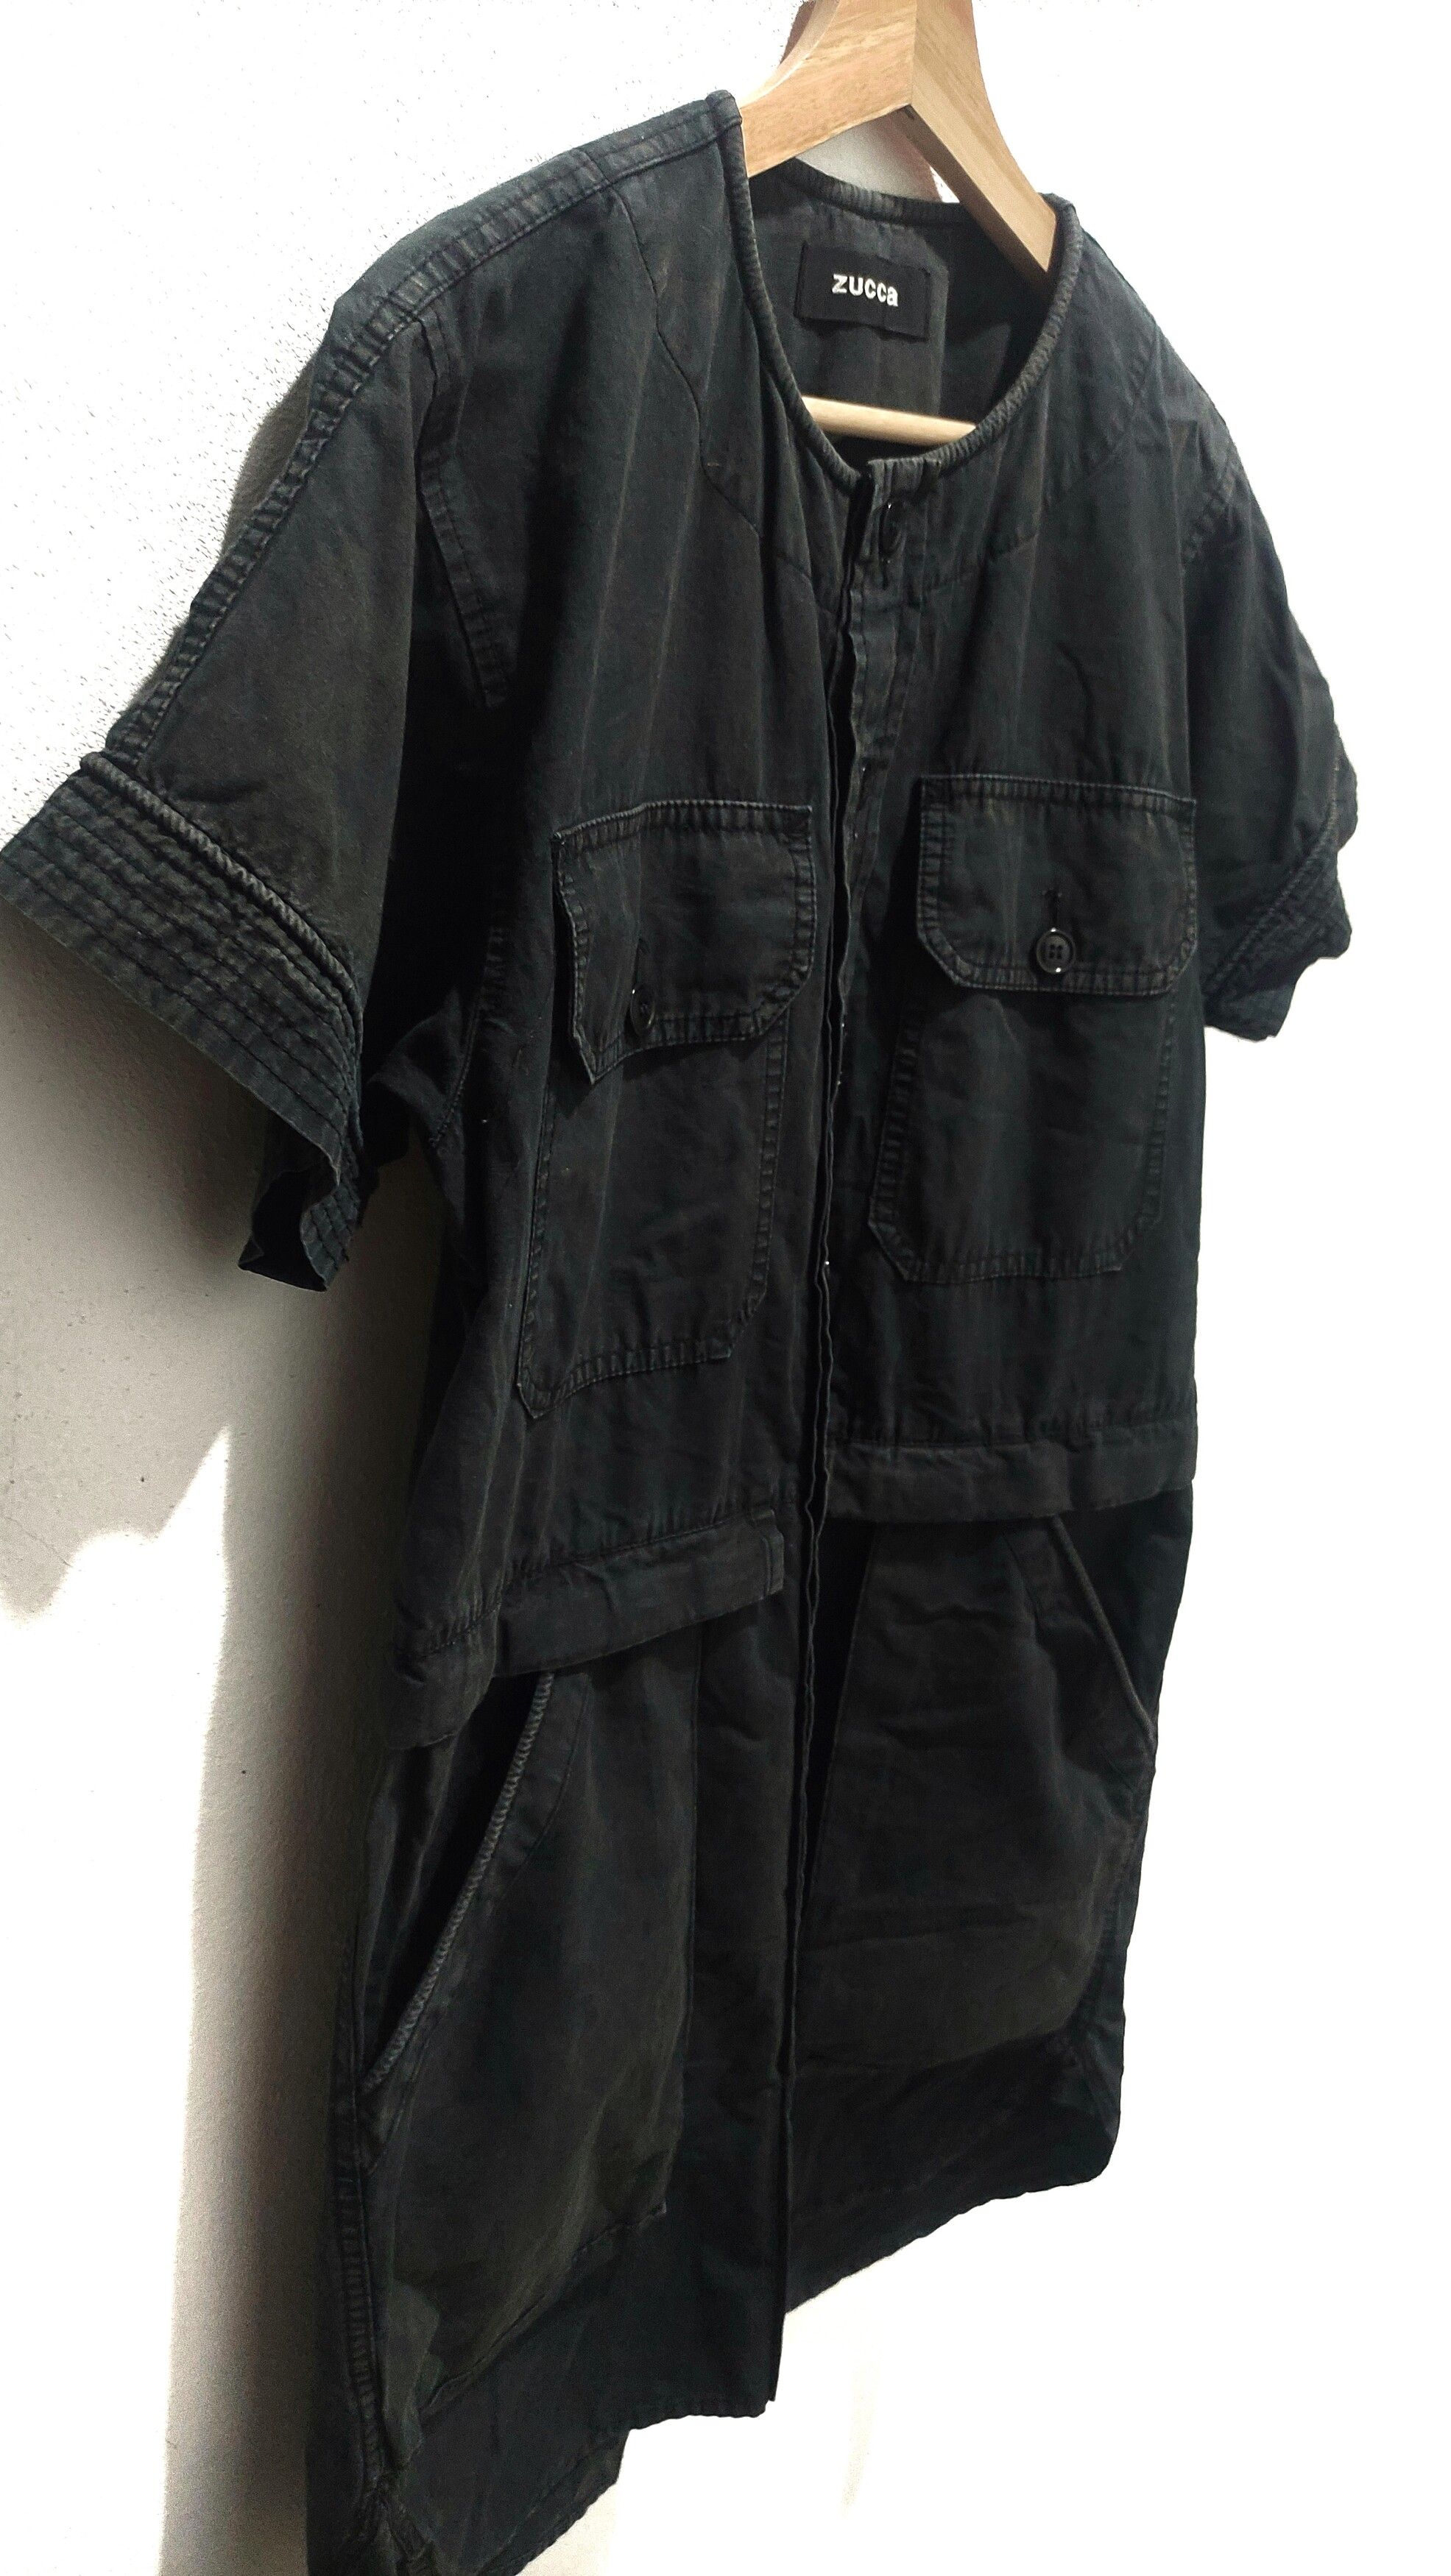 Issey Miyake Issey Miyake Zucca Multipocket Military Jumpsuit Size US M / EU 48-50 / 2 - 2 Preview